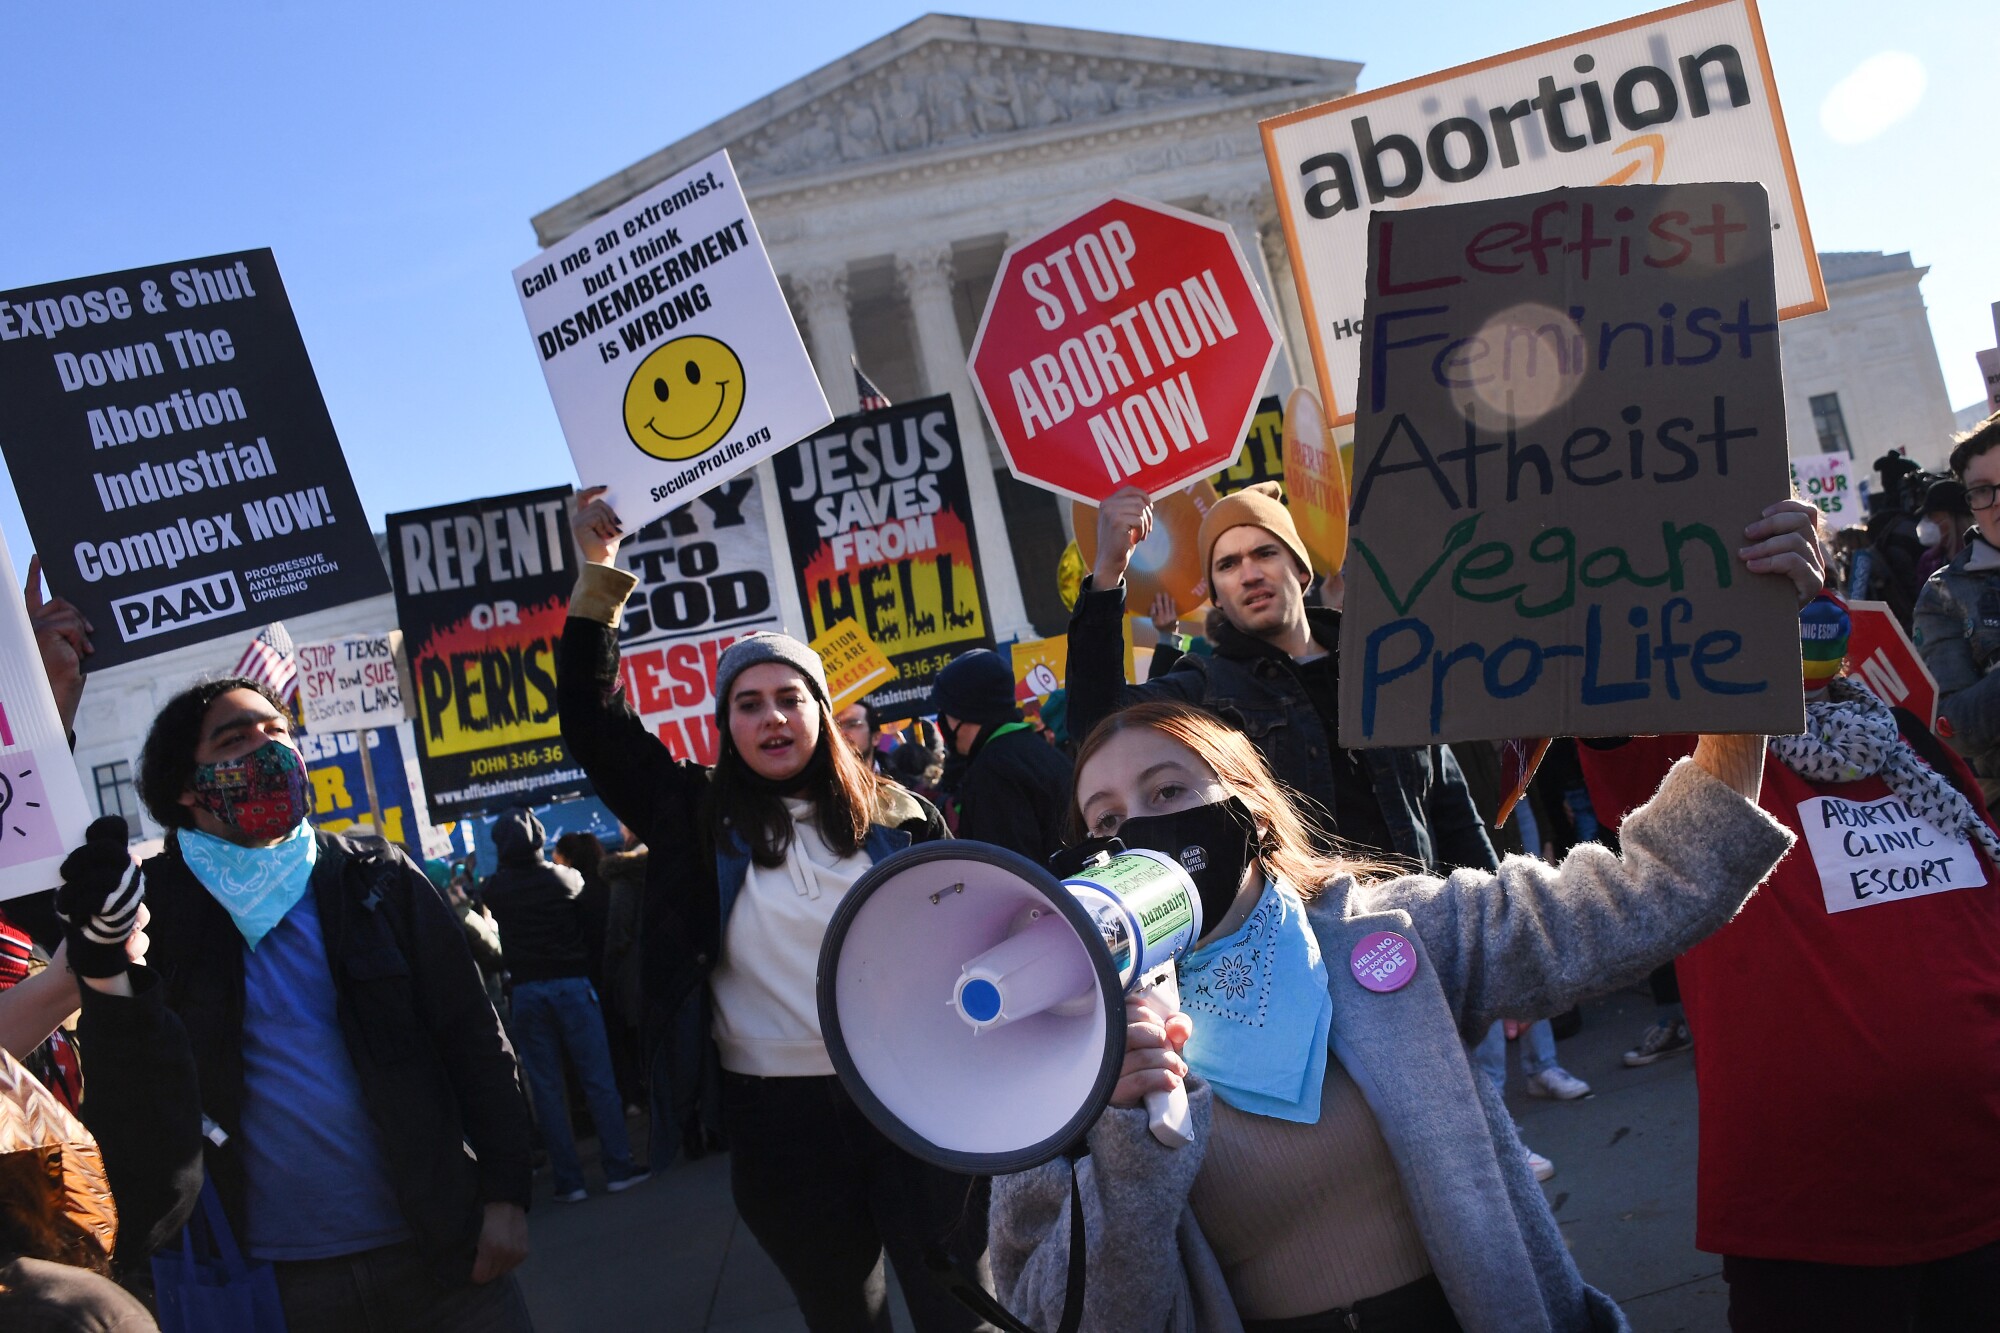 Abortion rights advocates and anti-abortion protesters demonstrate with signs